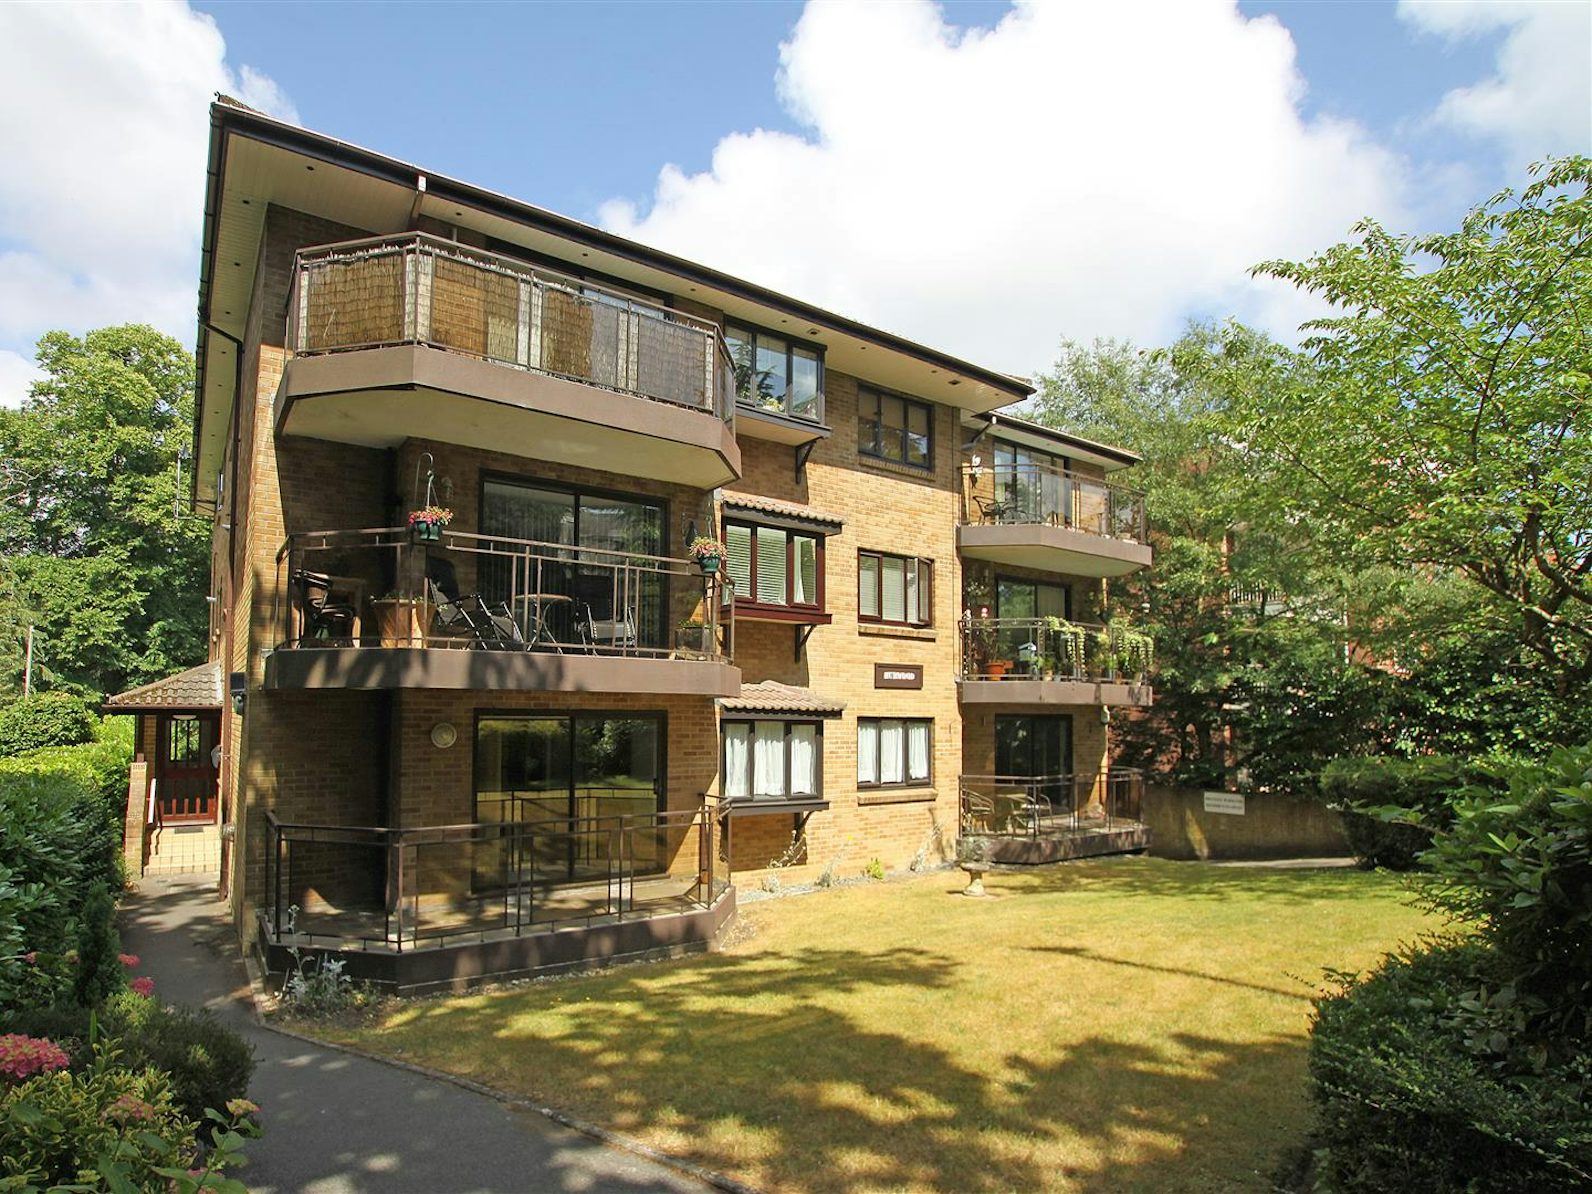 Flat for sale on Surrey Road Poole, BH12